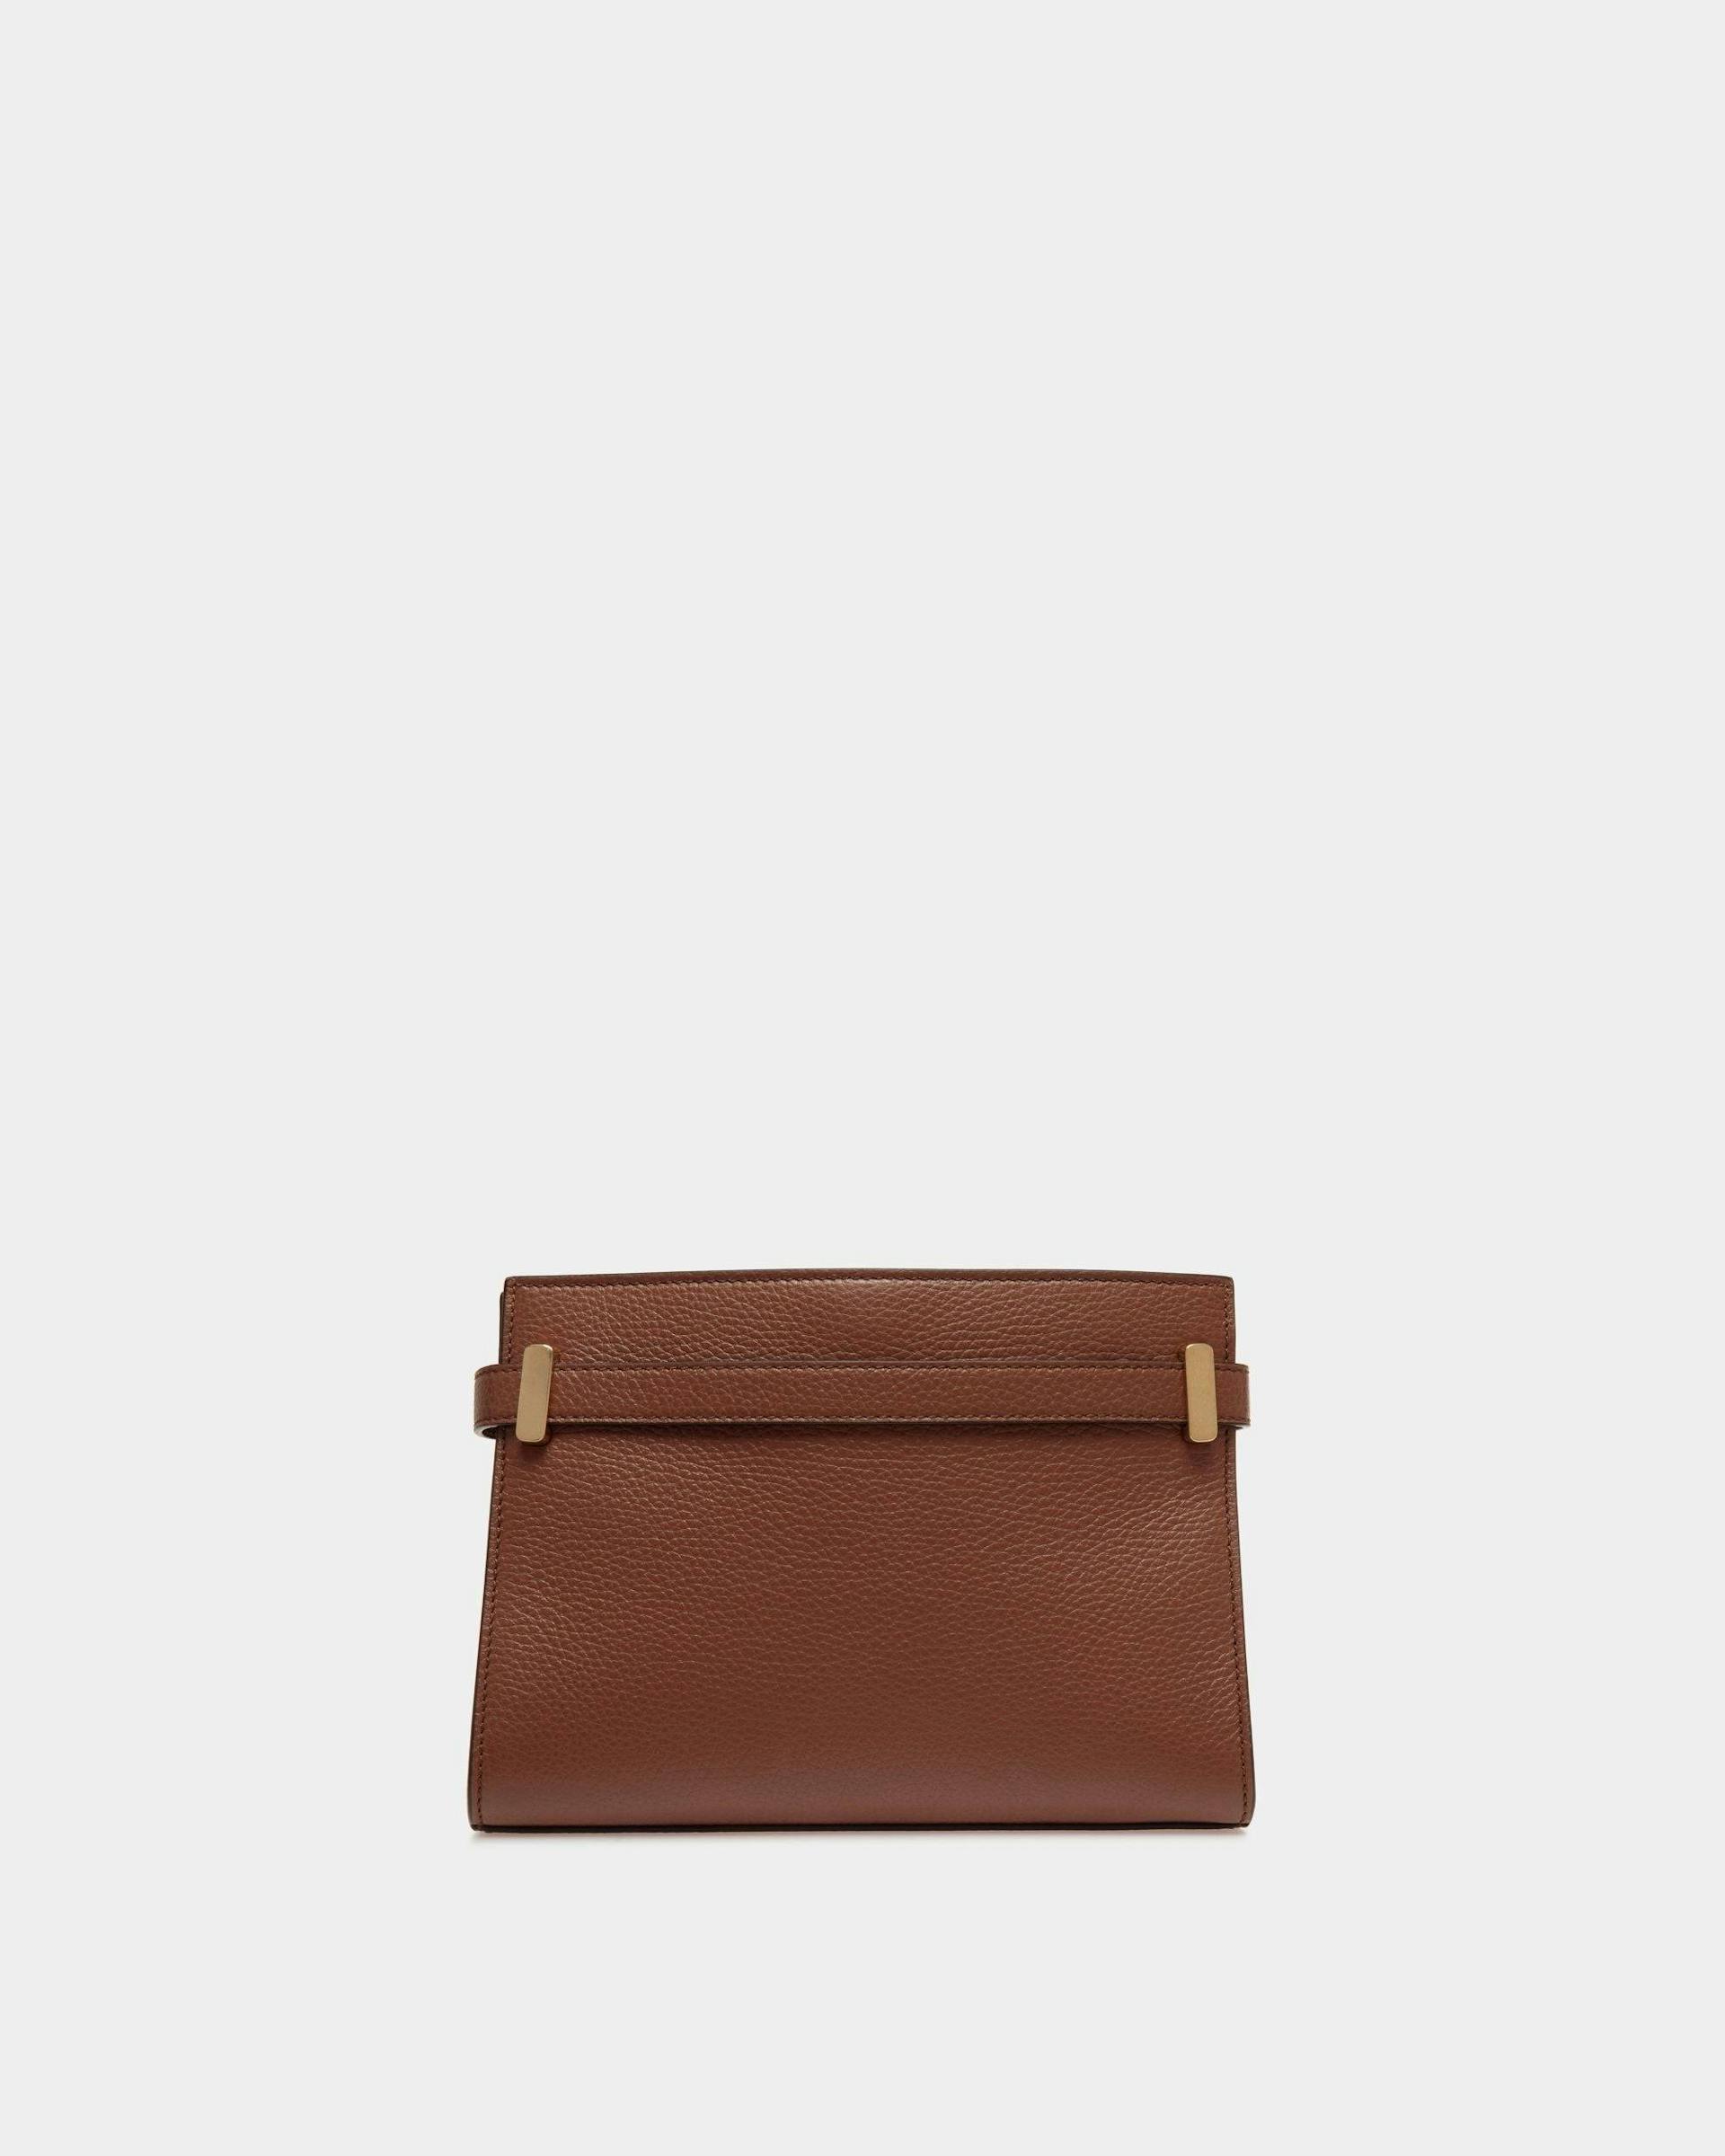 Women's Carriage Crossbody Bag in Brown Grained Leather | Bally | Still Life Back